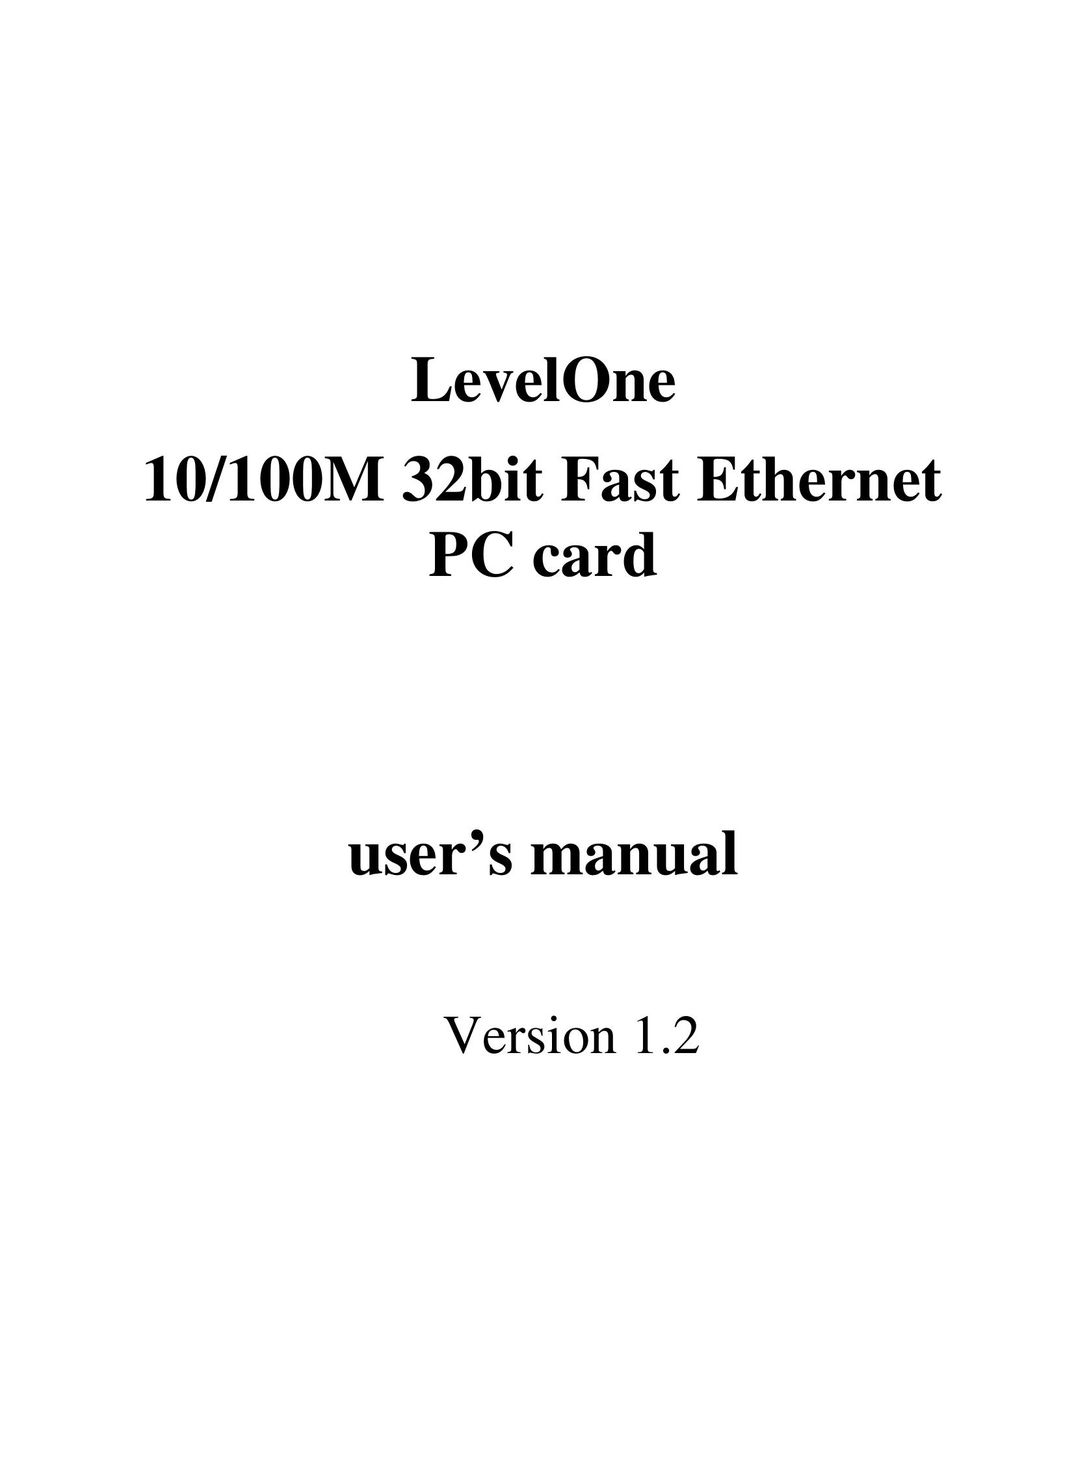 LevelOne 10/100M 32bit Fast Ethernet PC card Network Card User Manual